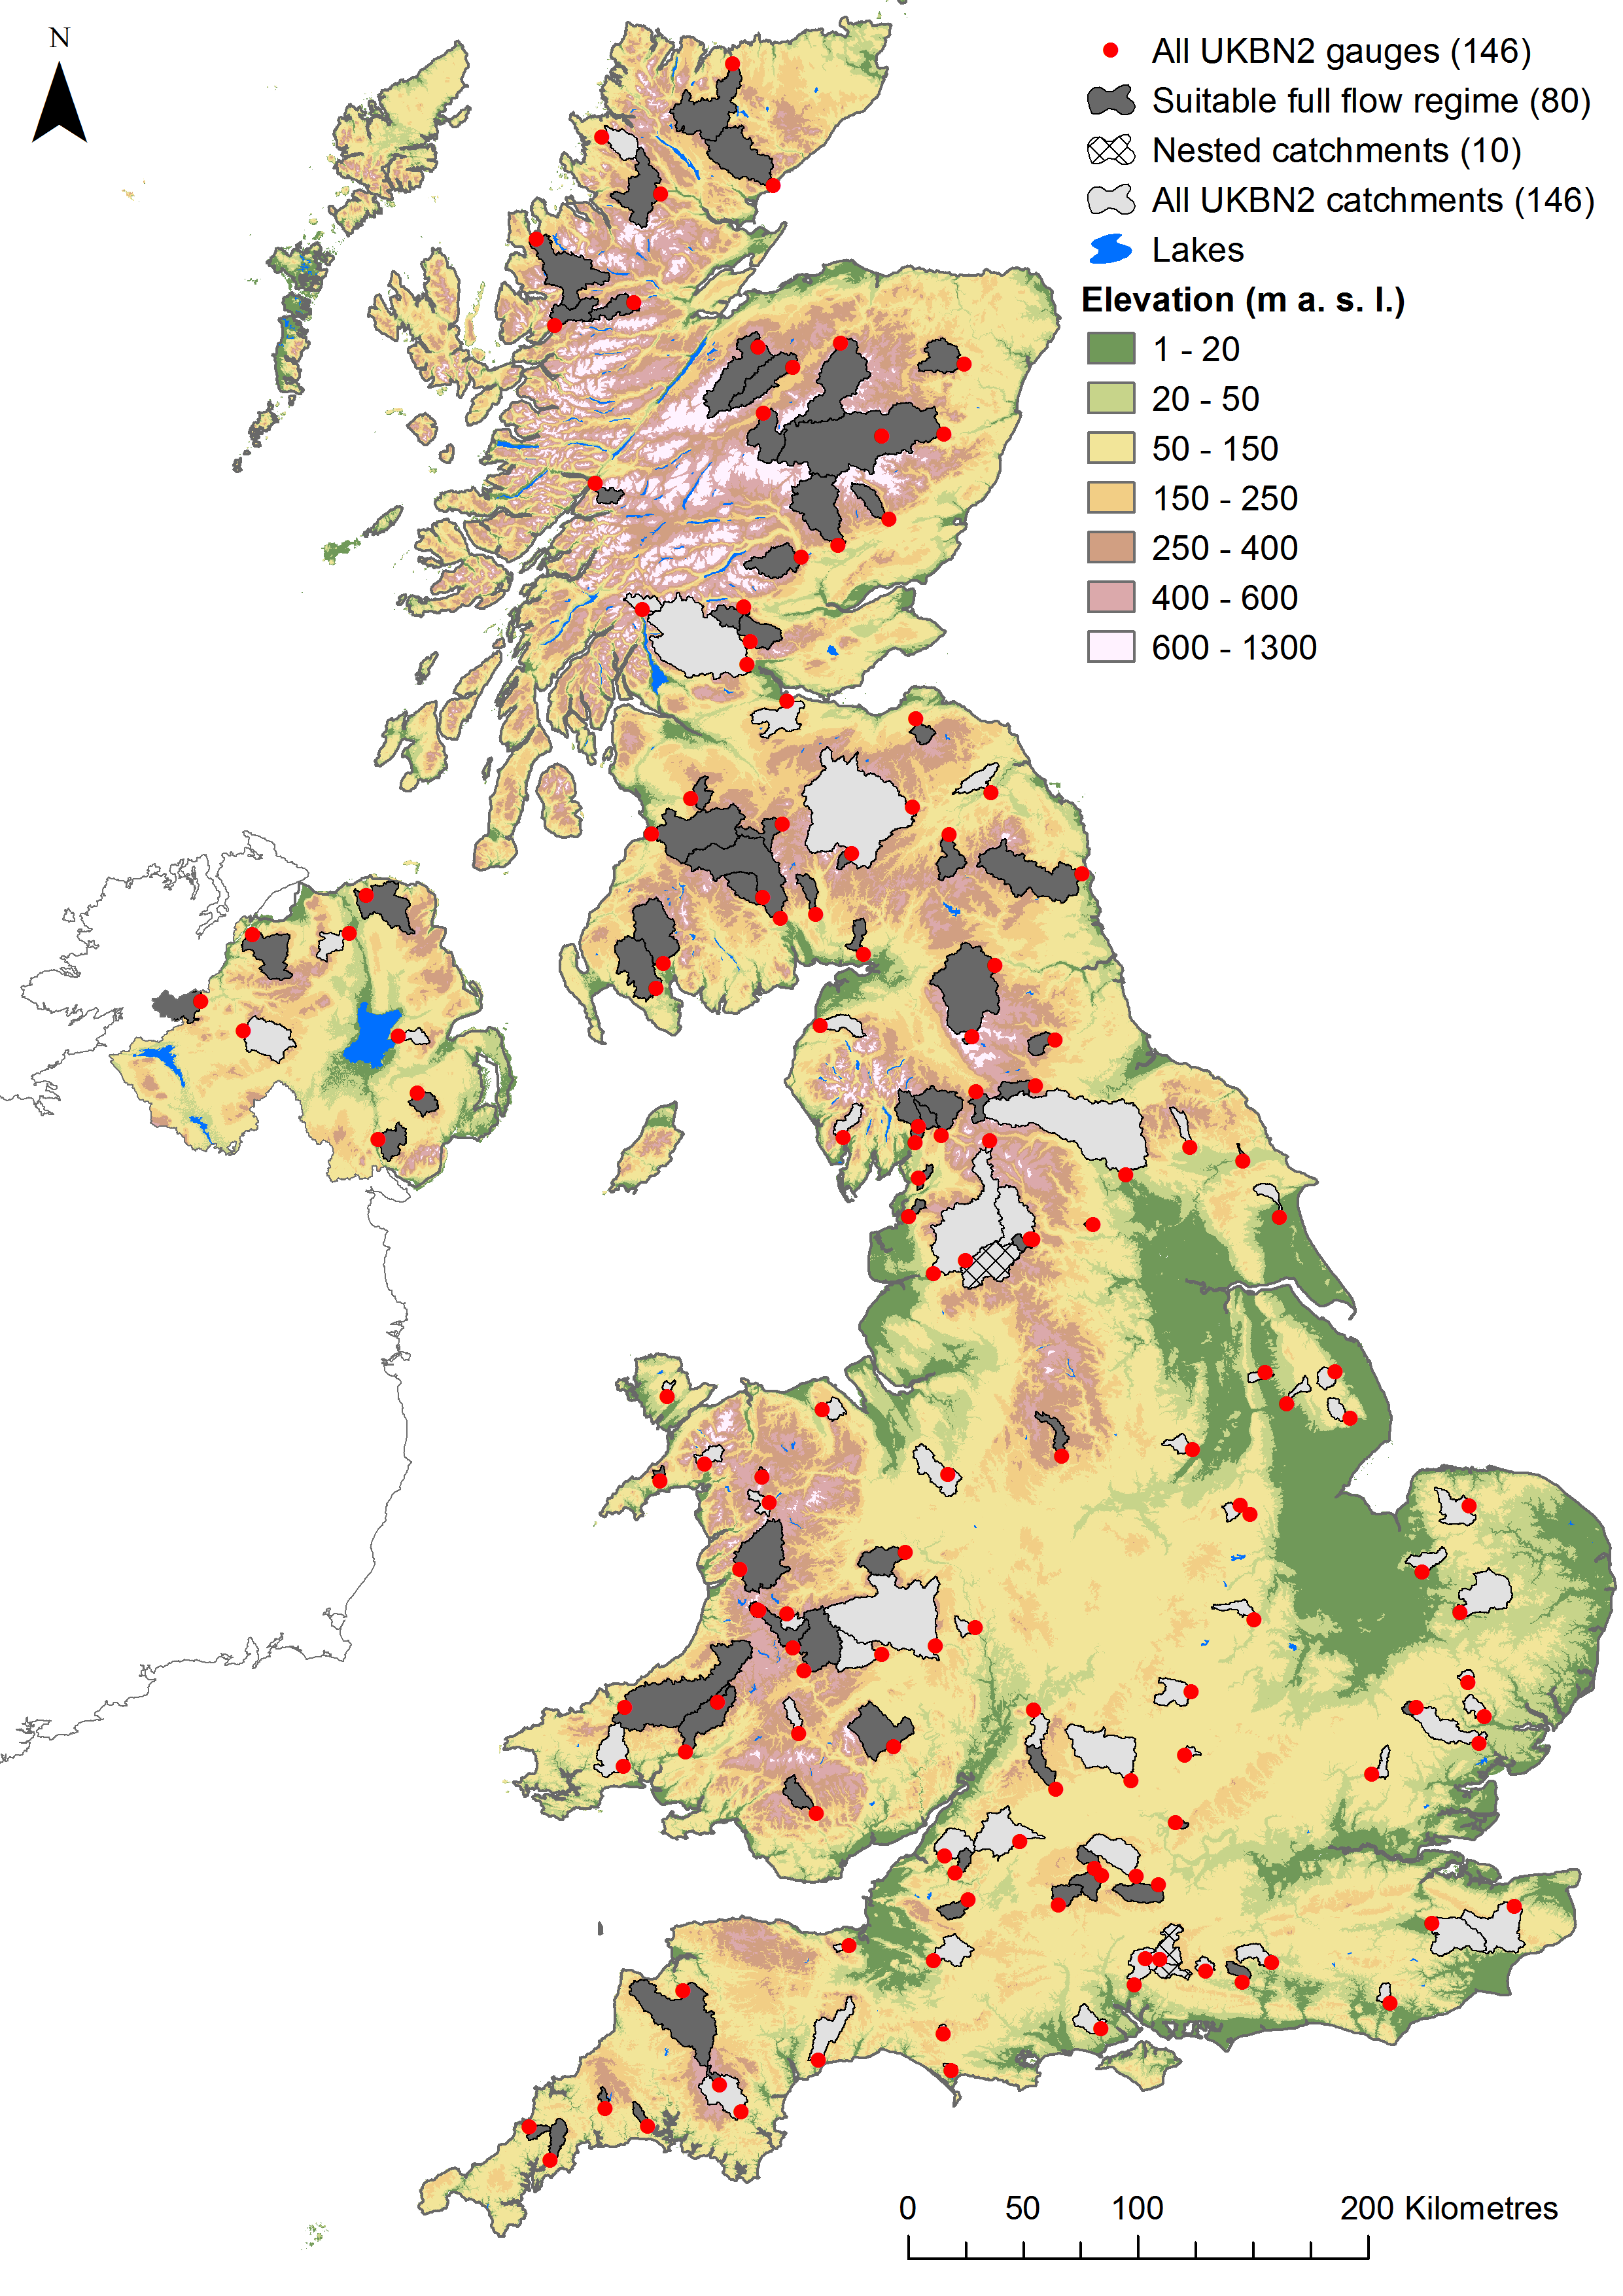 Map of the UK showing the location and catchment area of the 146 Benchmark Network gauges